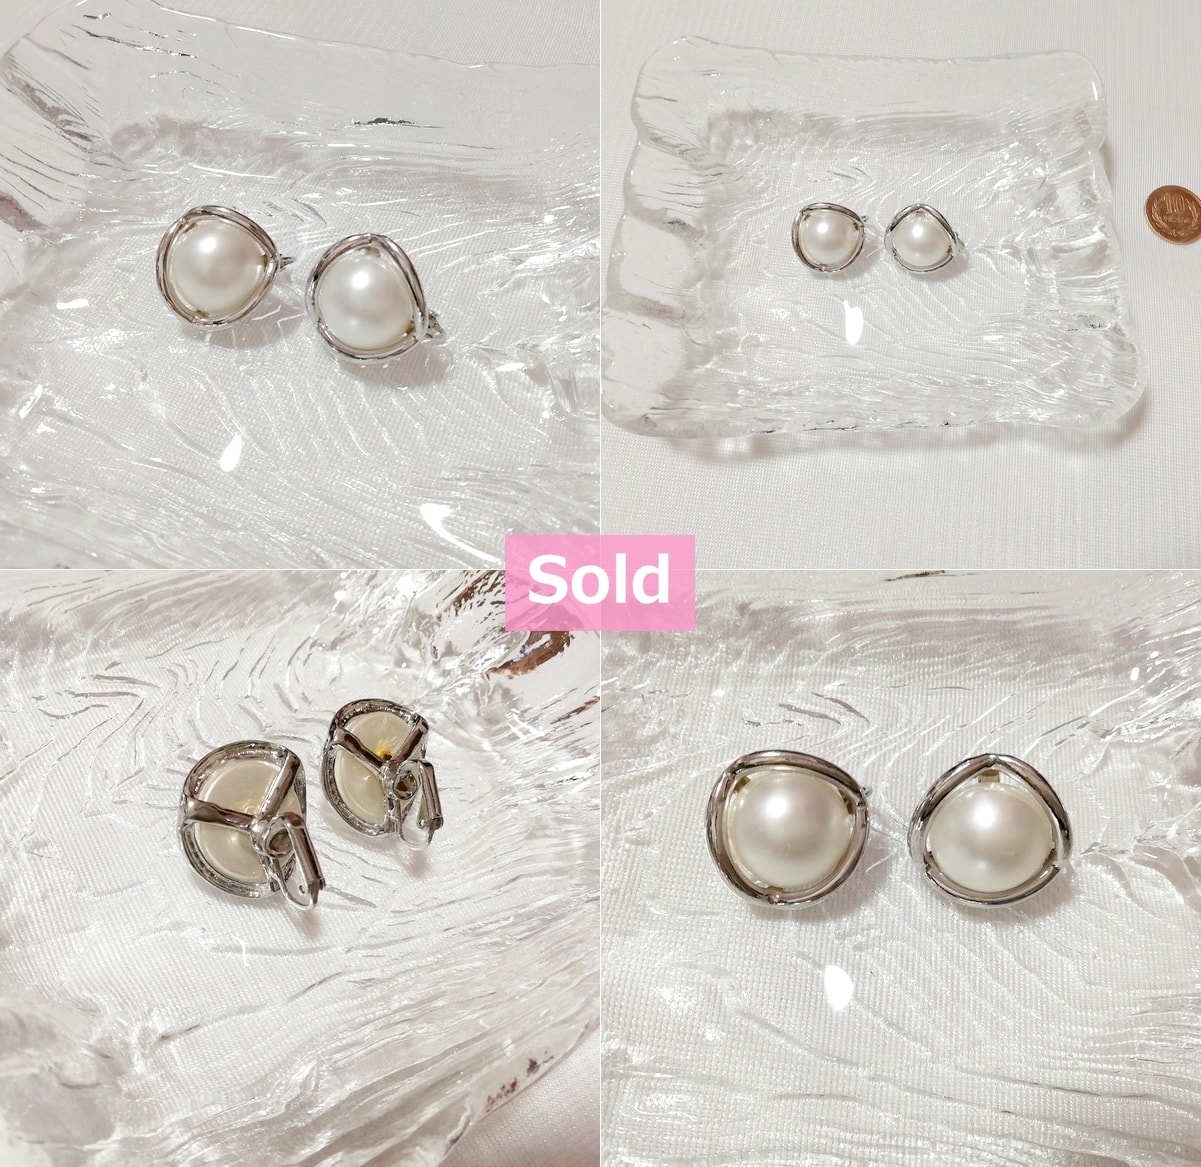 White pearl silver frame earrings jewelry accessories White pearl silver frame earrings jewelry accessories